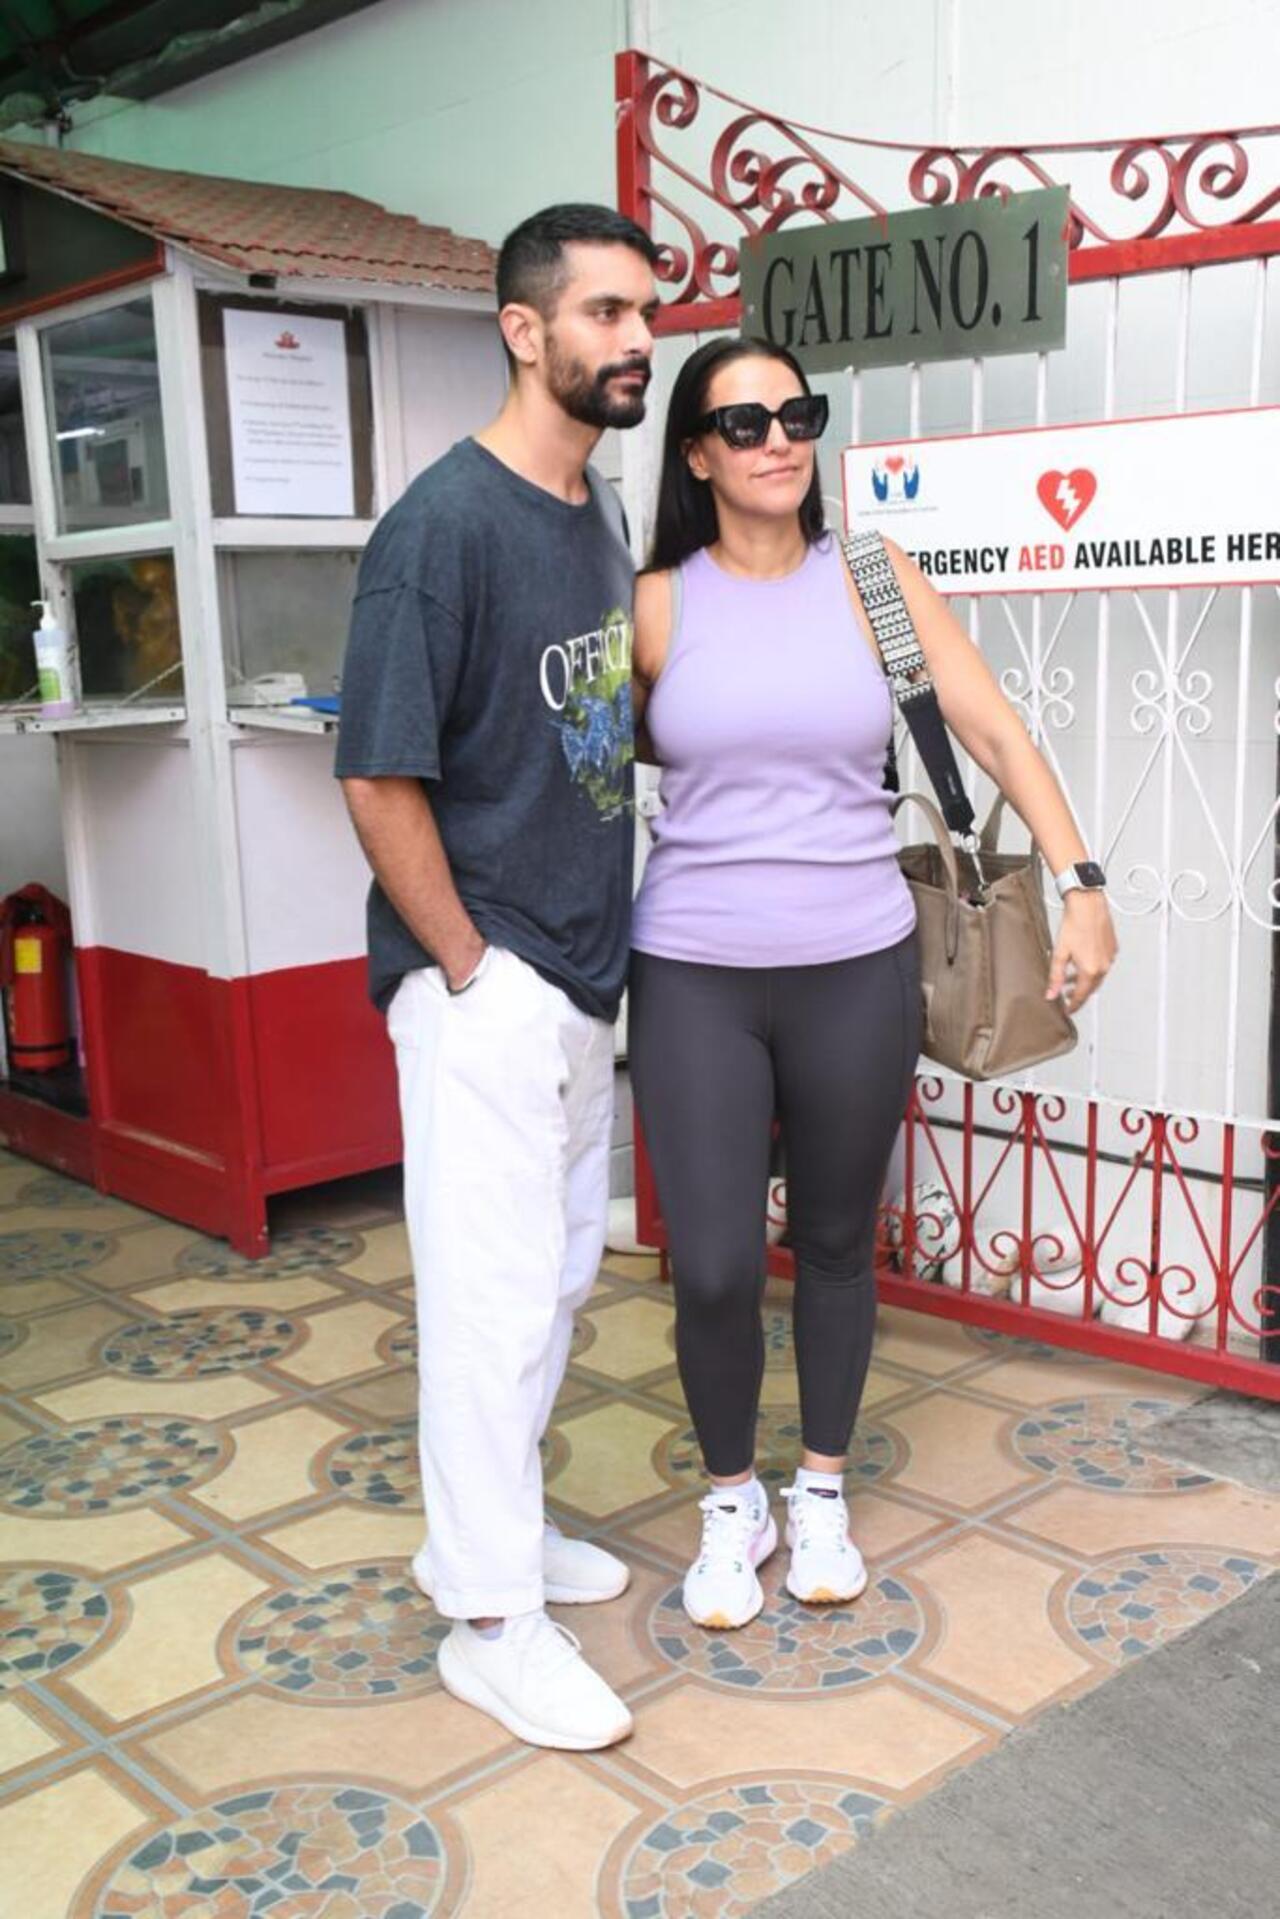 Neha Dhupia was photographed in a purple top paired with black jeans, while her husband, Angad, coordinated with her by wearing a blue T-shirt and white jeans